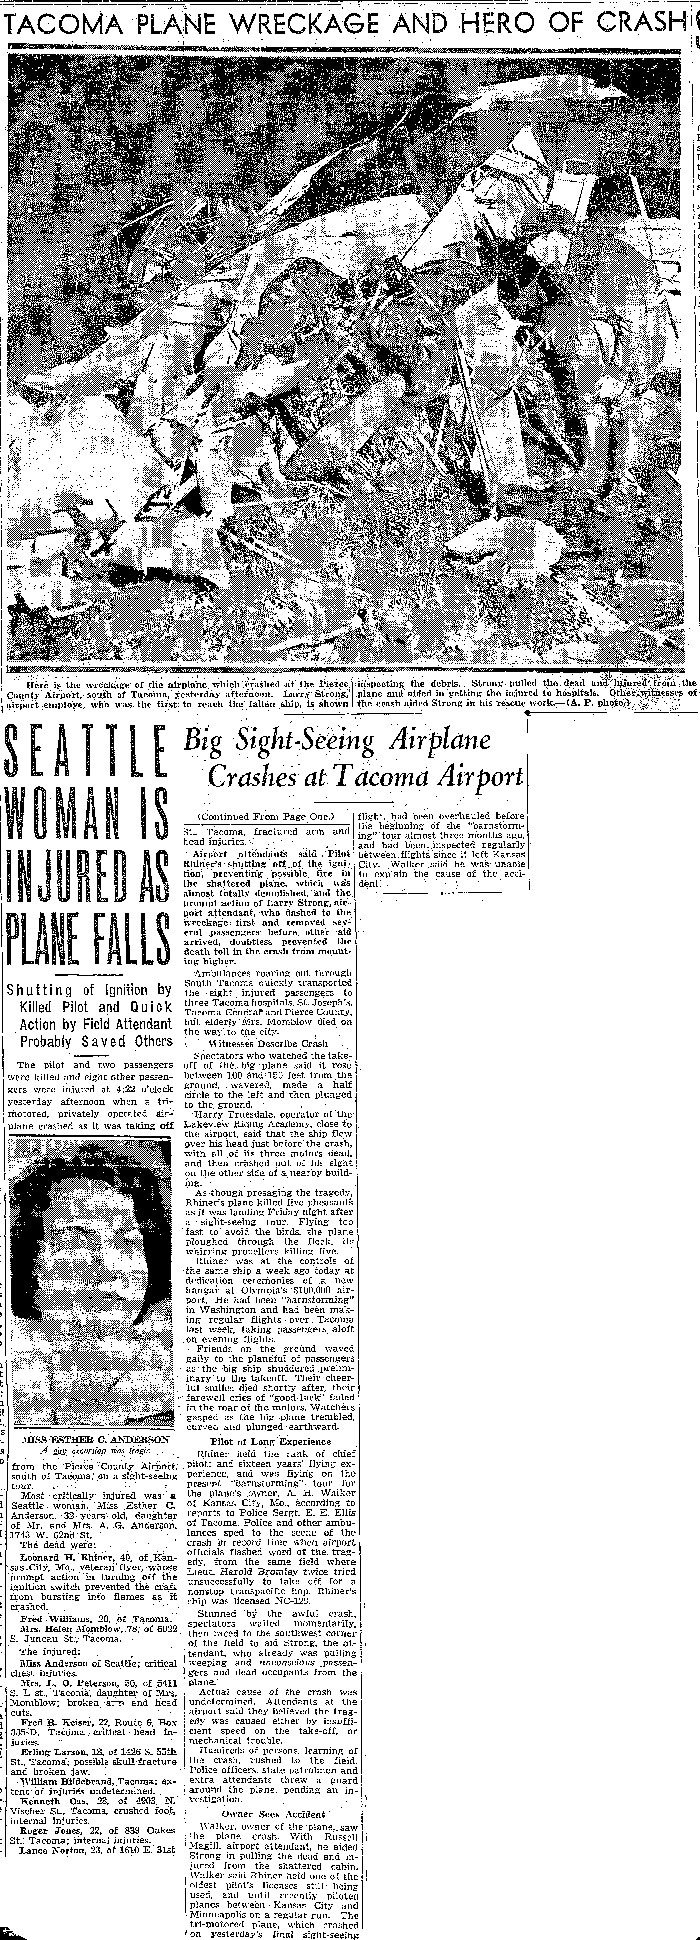 Seattle Sunday Times of October 24, 1937 (Source: Seattle Times via Woodling)